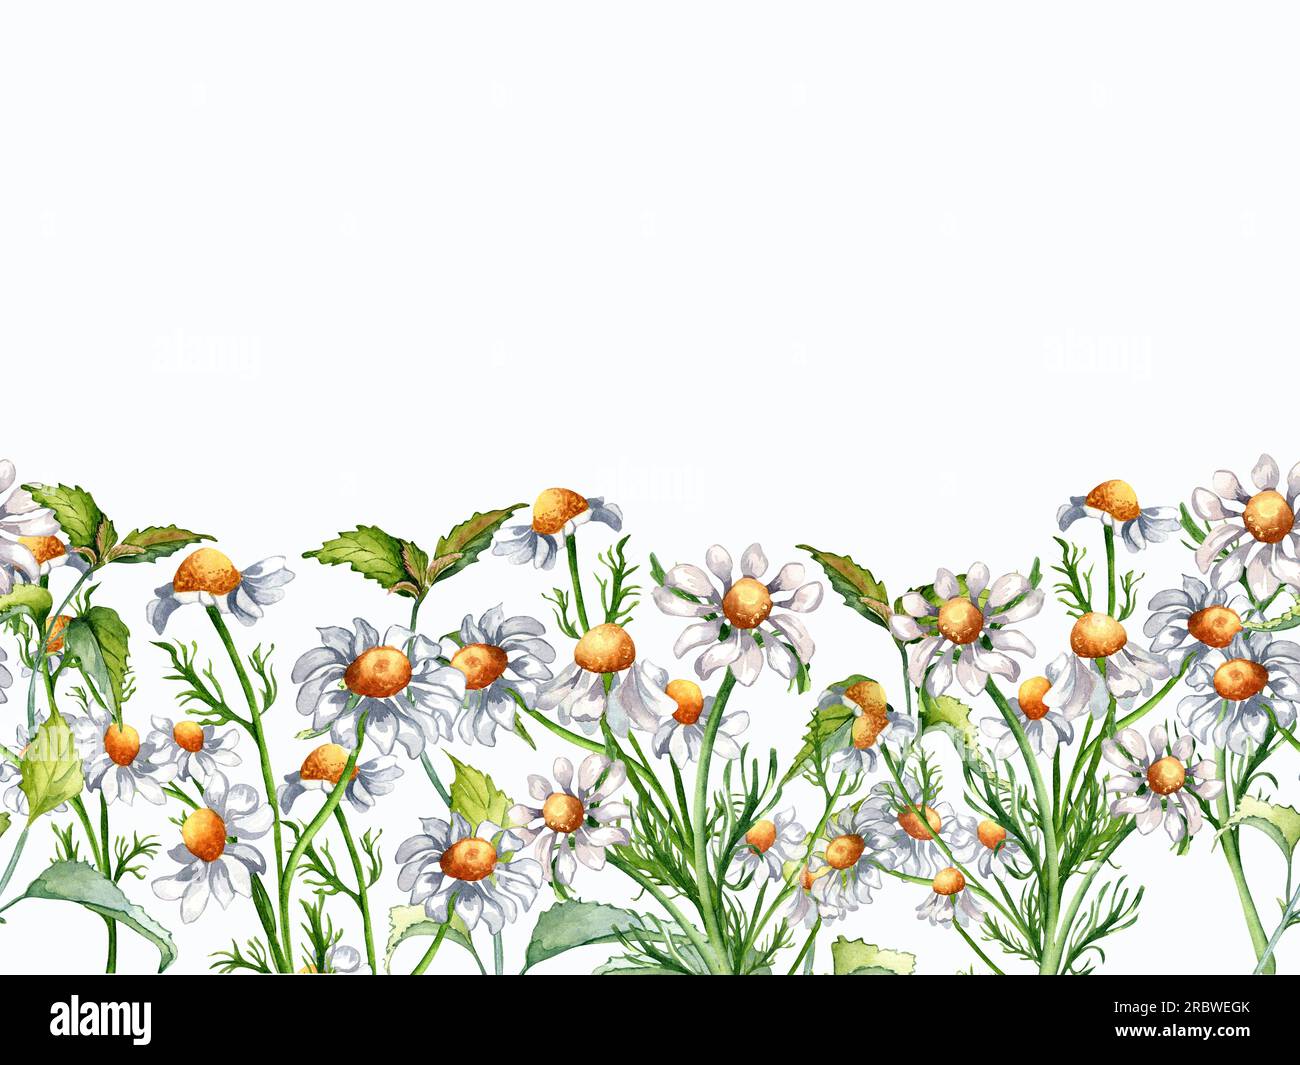 Seamless border of medicinal plants chamomile watercolor illustration isolated on white background. Daisy yellow flower, useful herb camomile, nettle Stock Photo